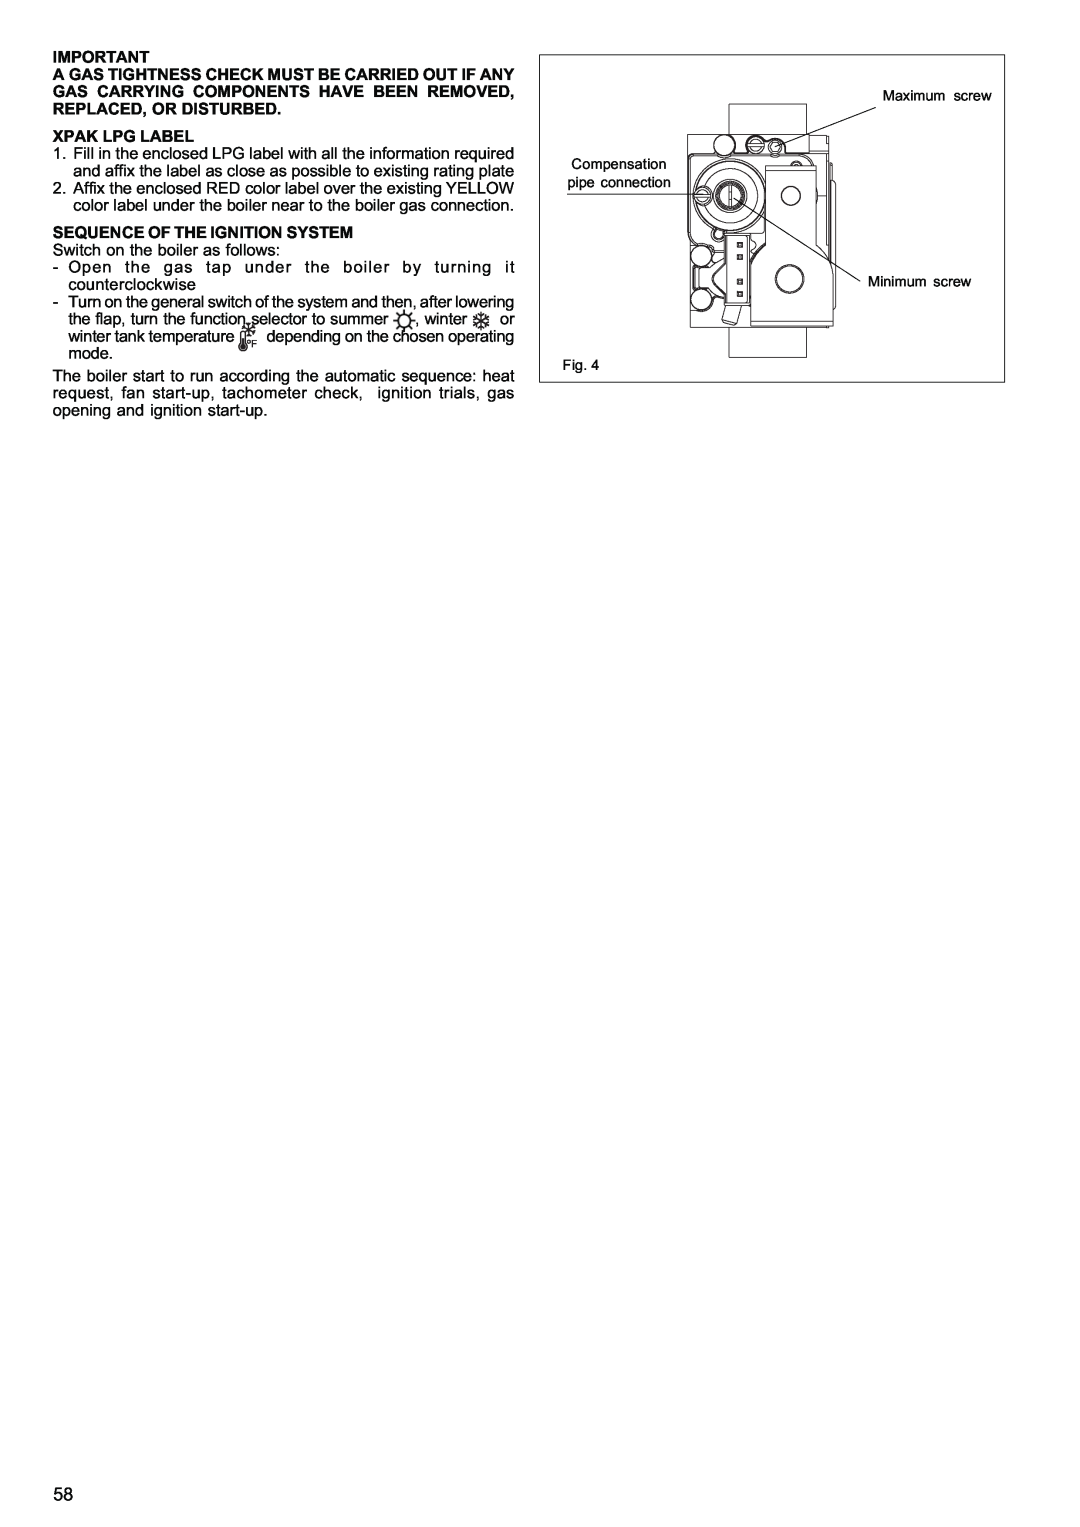 Raypak 85, 120 manual Xpak Lpg Label, Sequence Of The Ignition System 